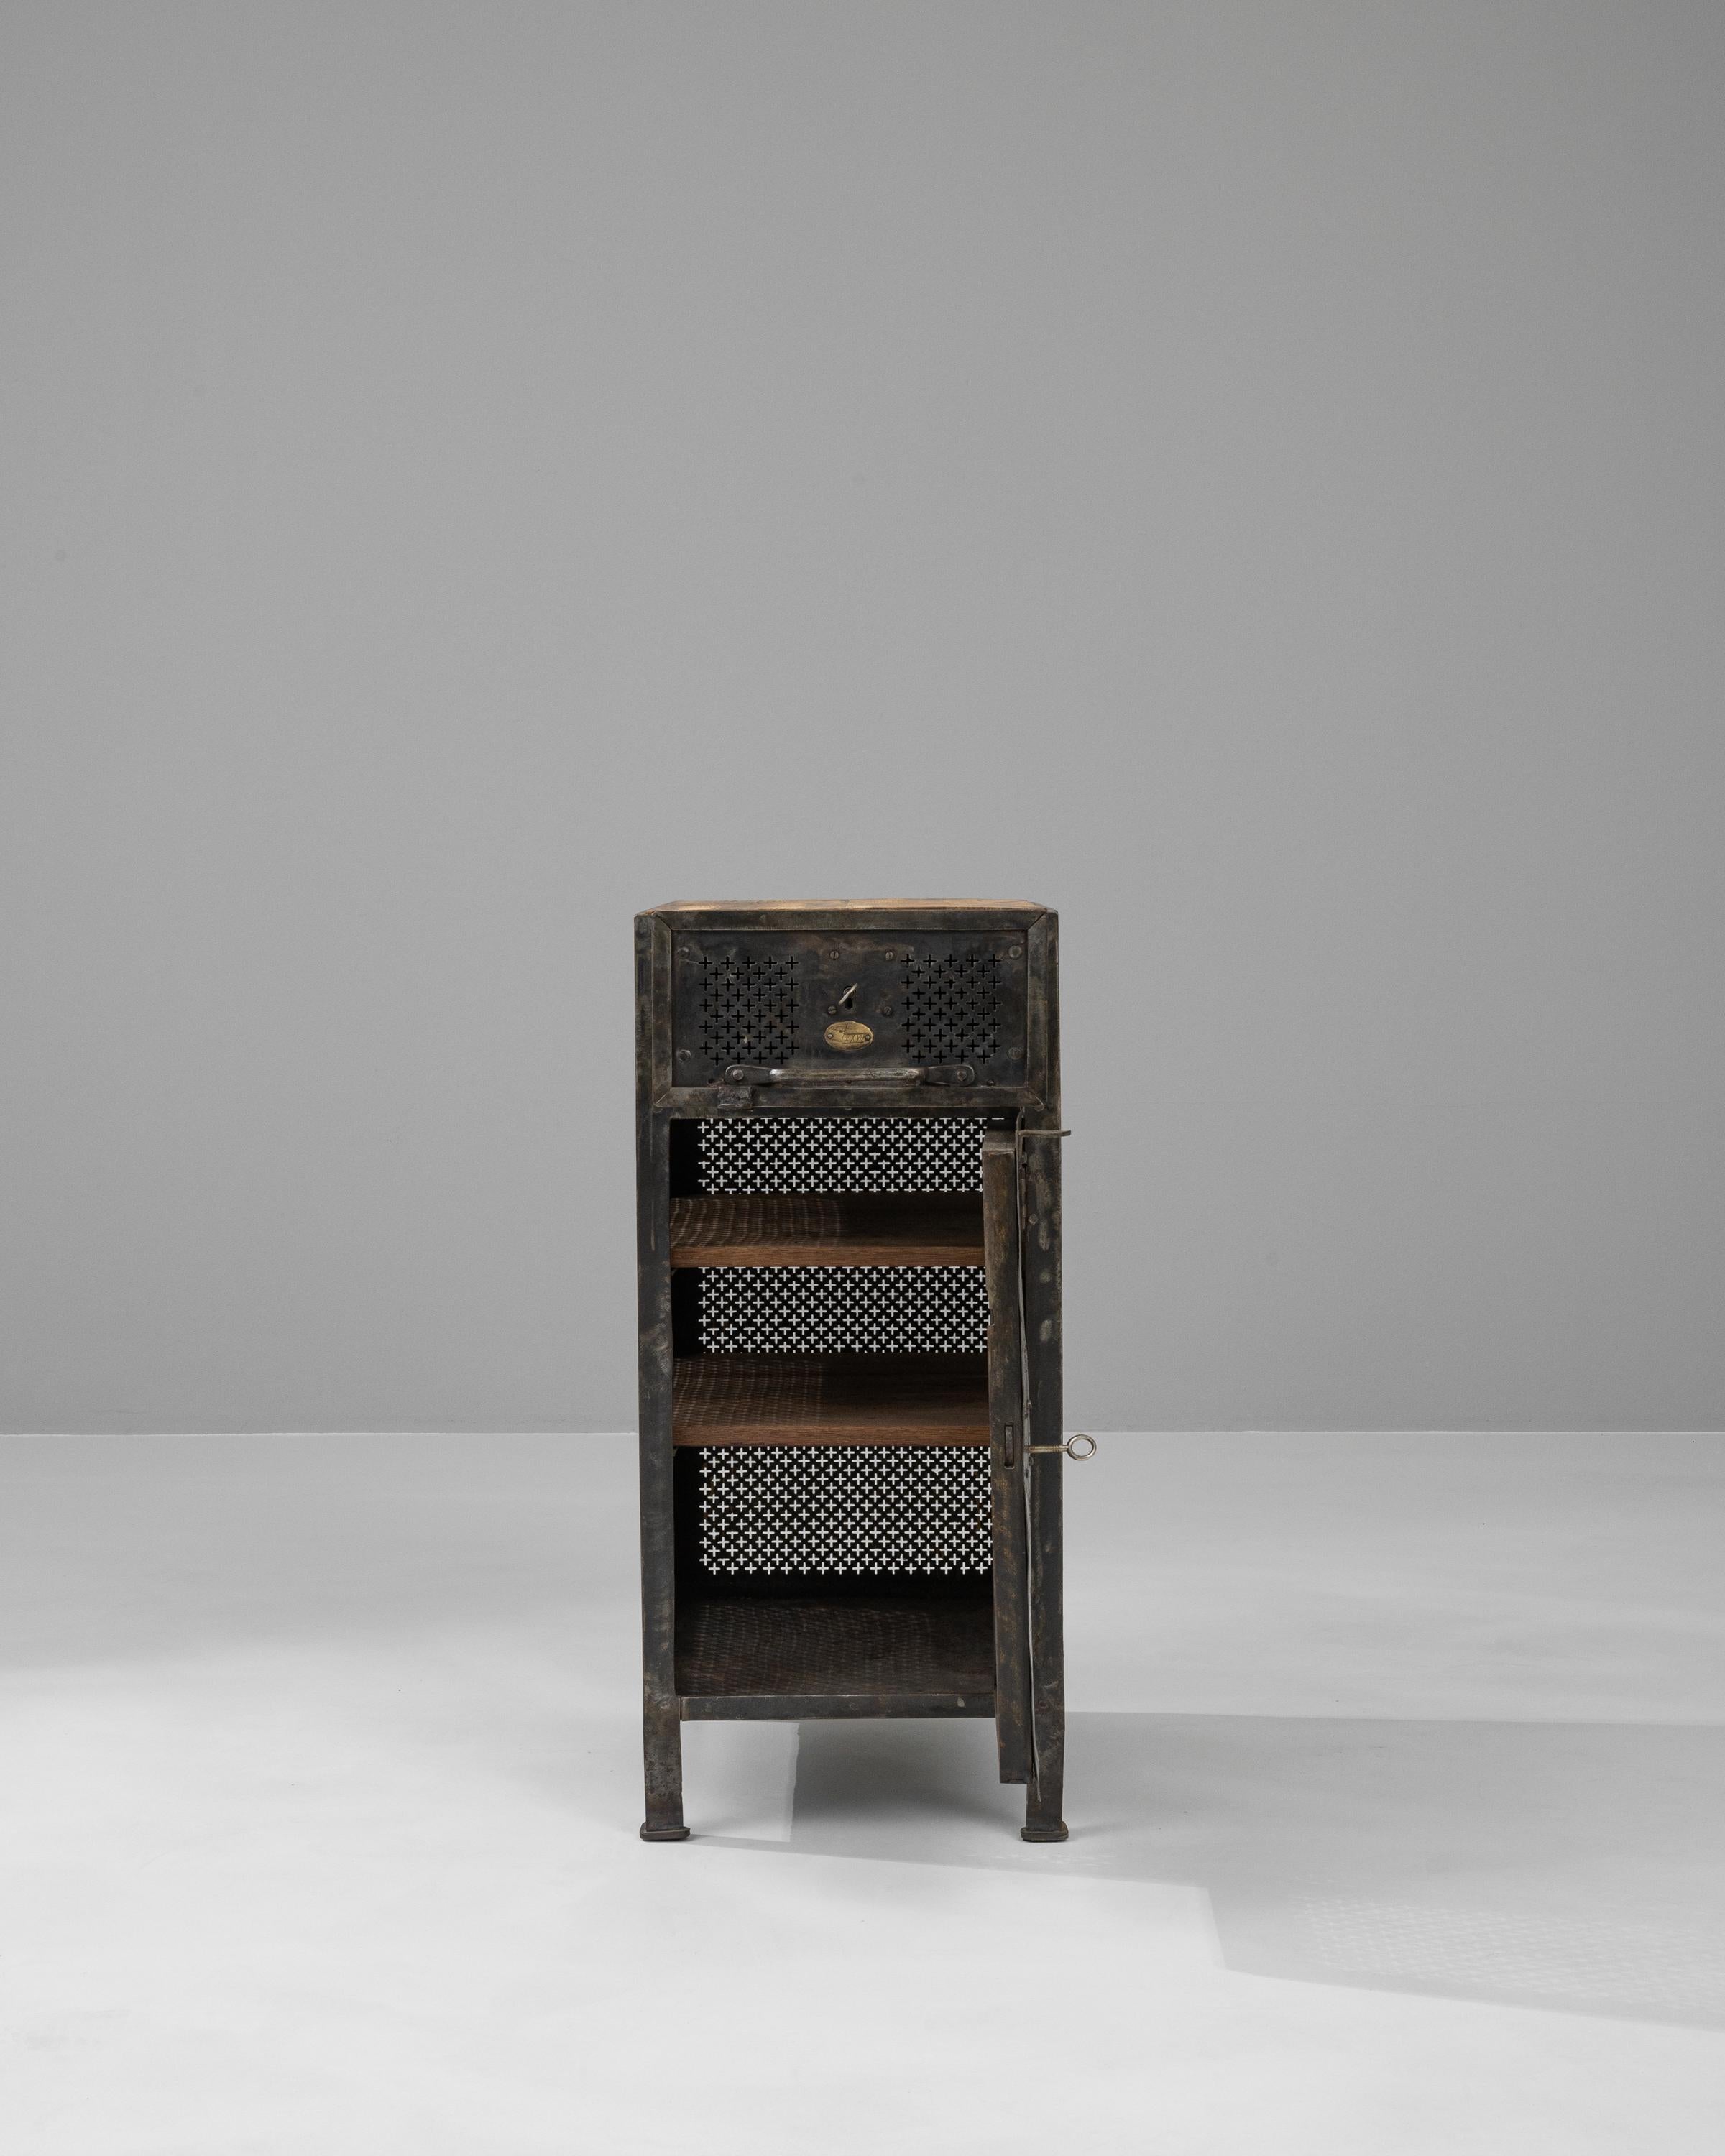 This Early 20th Century French Metal Bedside Table brings an industrial edge to classic bedroom decor. The combination of sturdy metal punched with intricate patterns juxtaposed against a warm wooden top creates a unique aesthetic that speaks to the